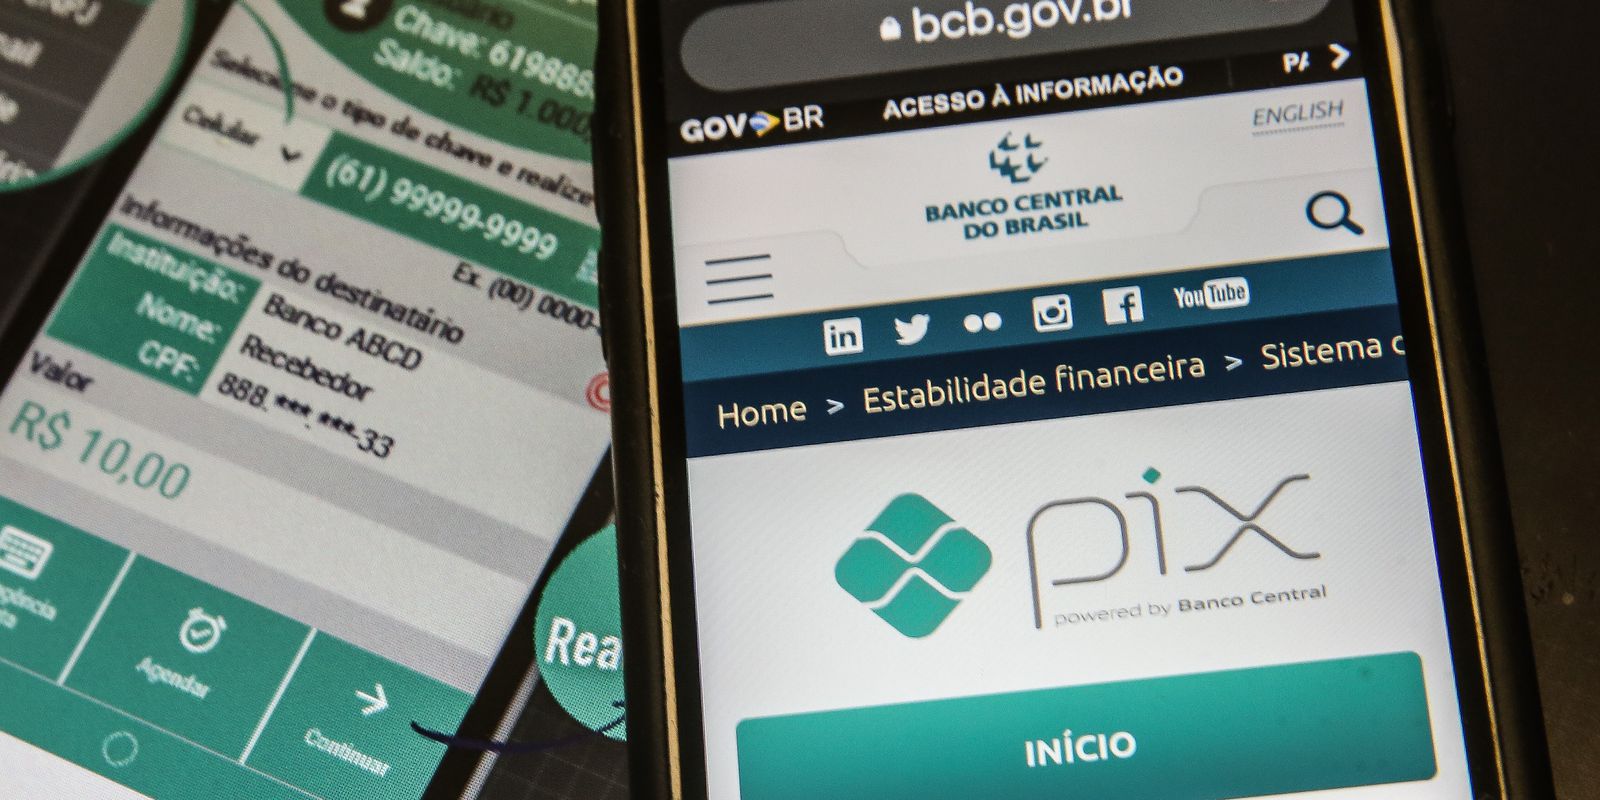 Pix consolidates itself as the most used means of payment in the country